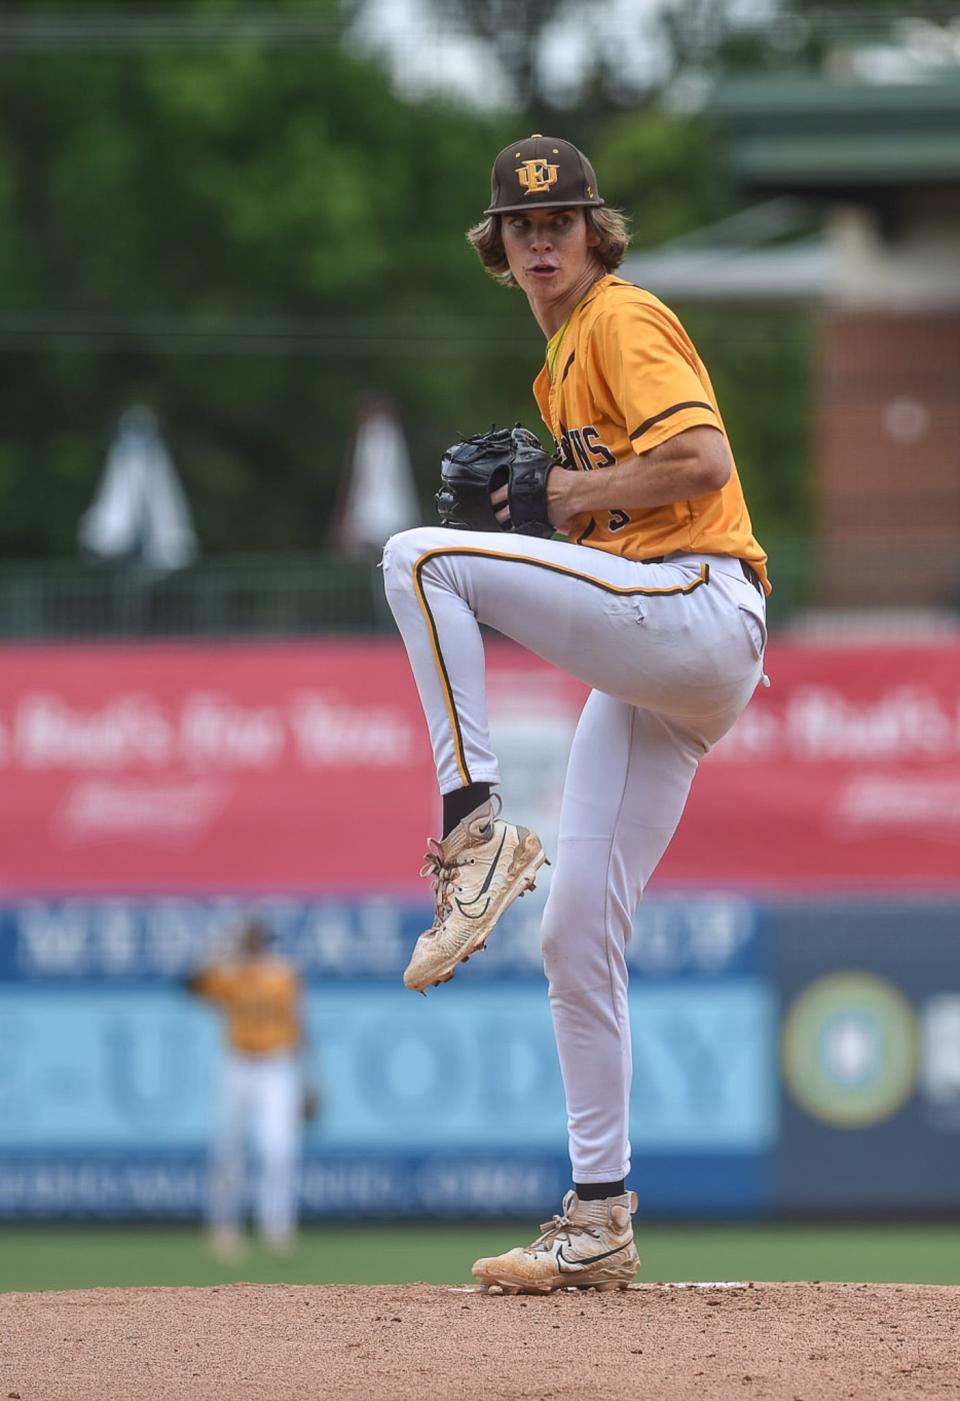 East Union Urchins’ Landon Harmon (3) pitches the ball during the MHSAA class 2 baseball championships at Trustmark Park in Pearl, Miss., Wednesday, May 31, 2023. East Union beat Pisgah 14-0.